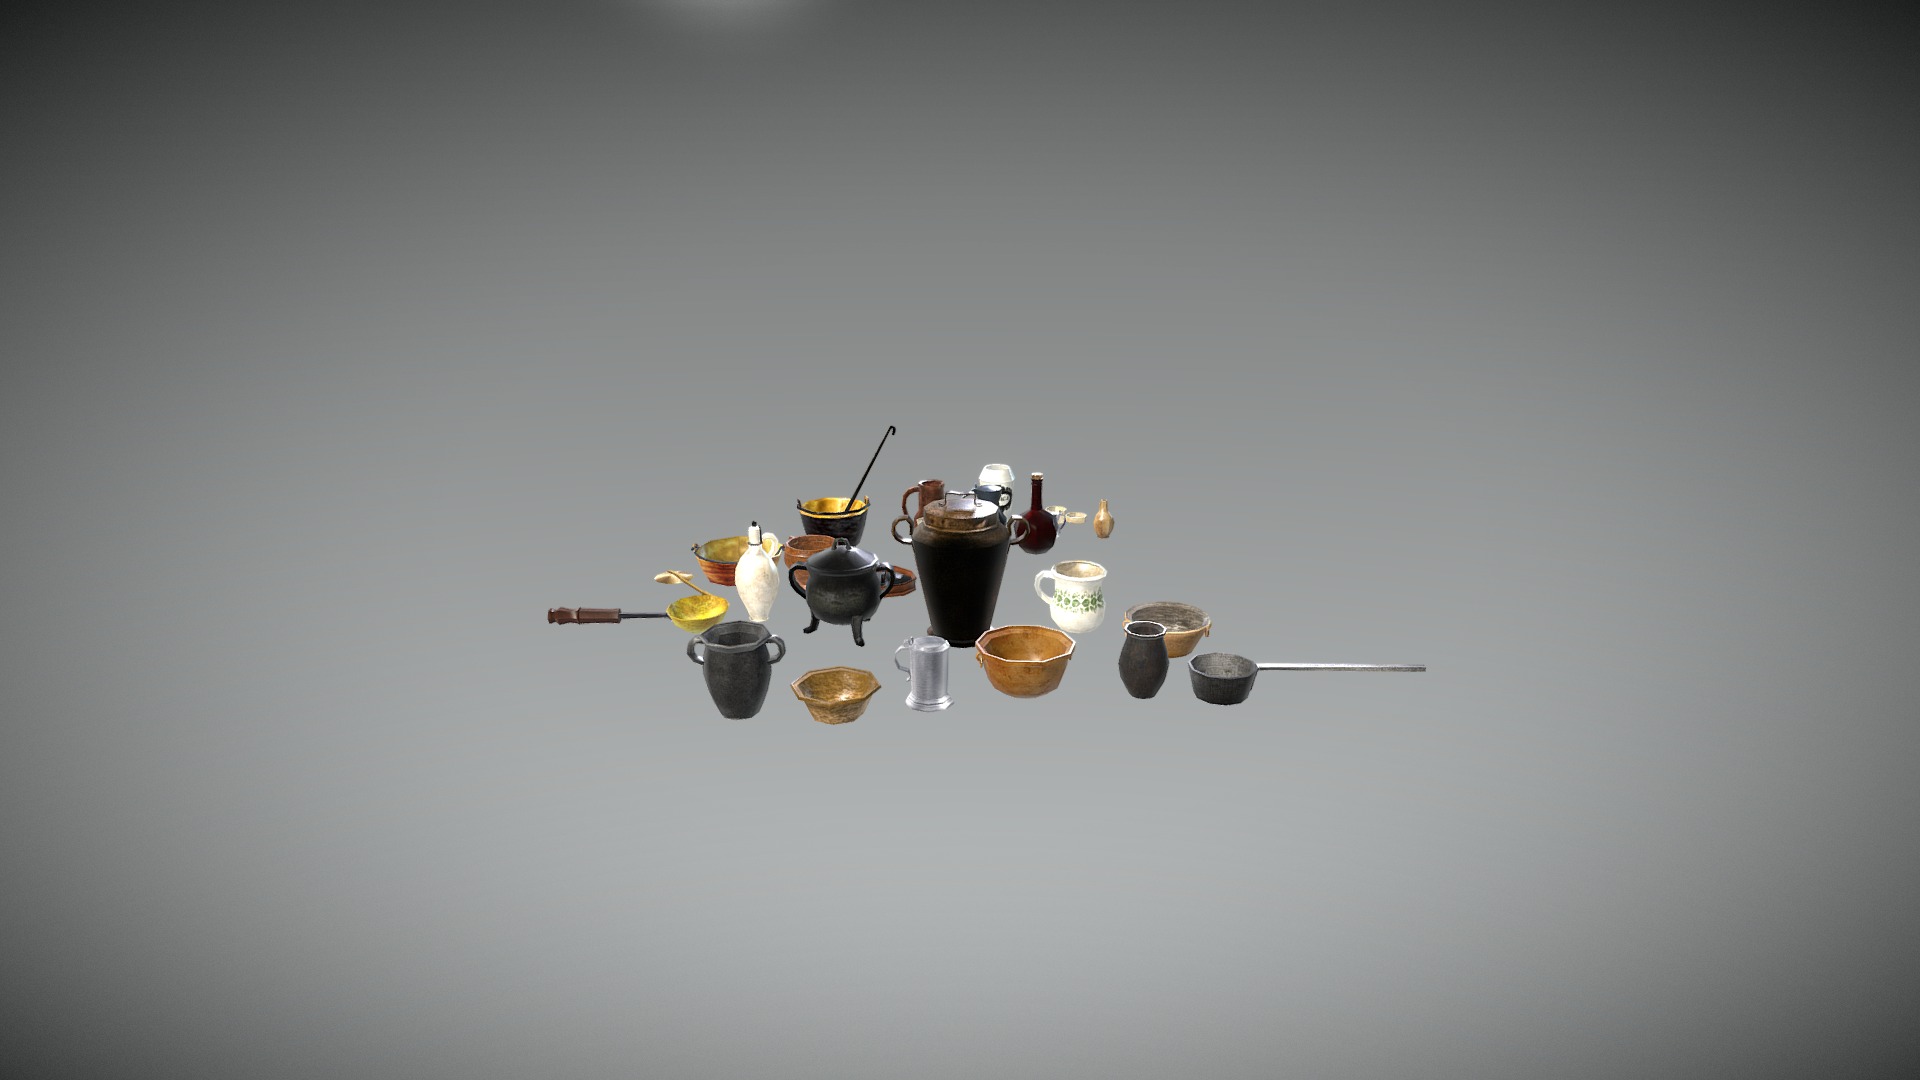 3D model Props Textured 1 - This is a 3D model of the Props Textured 1. The 3D model is about a group of small objects.